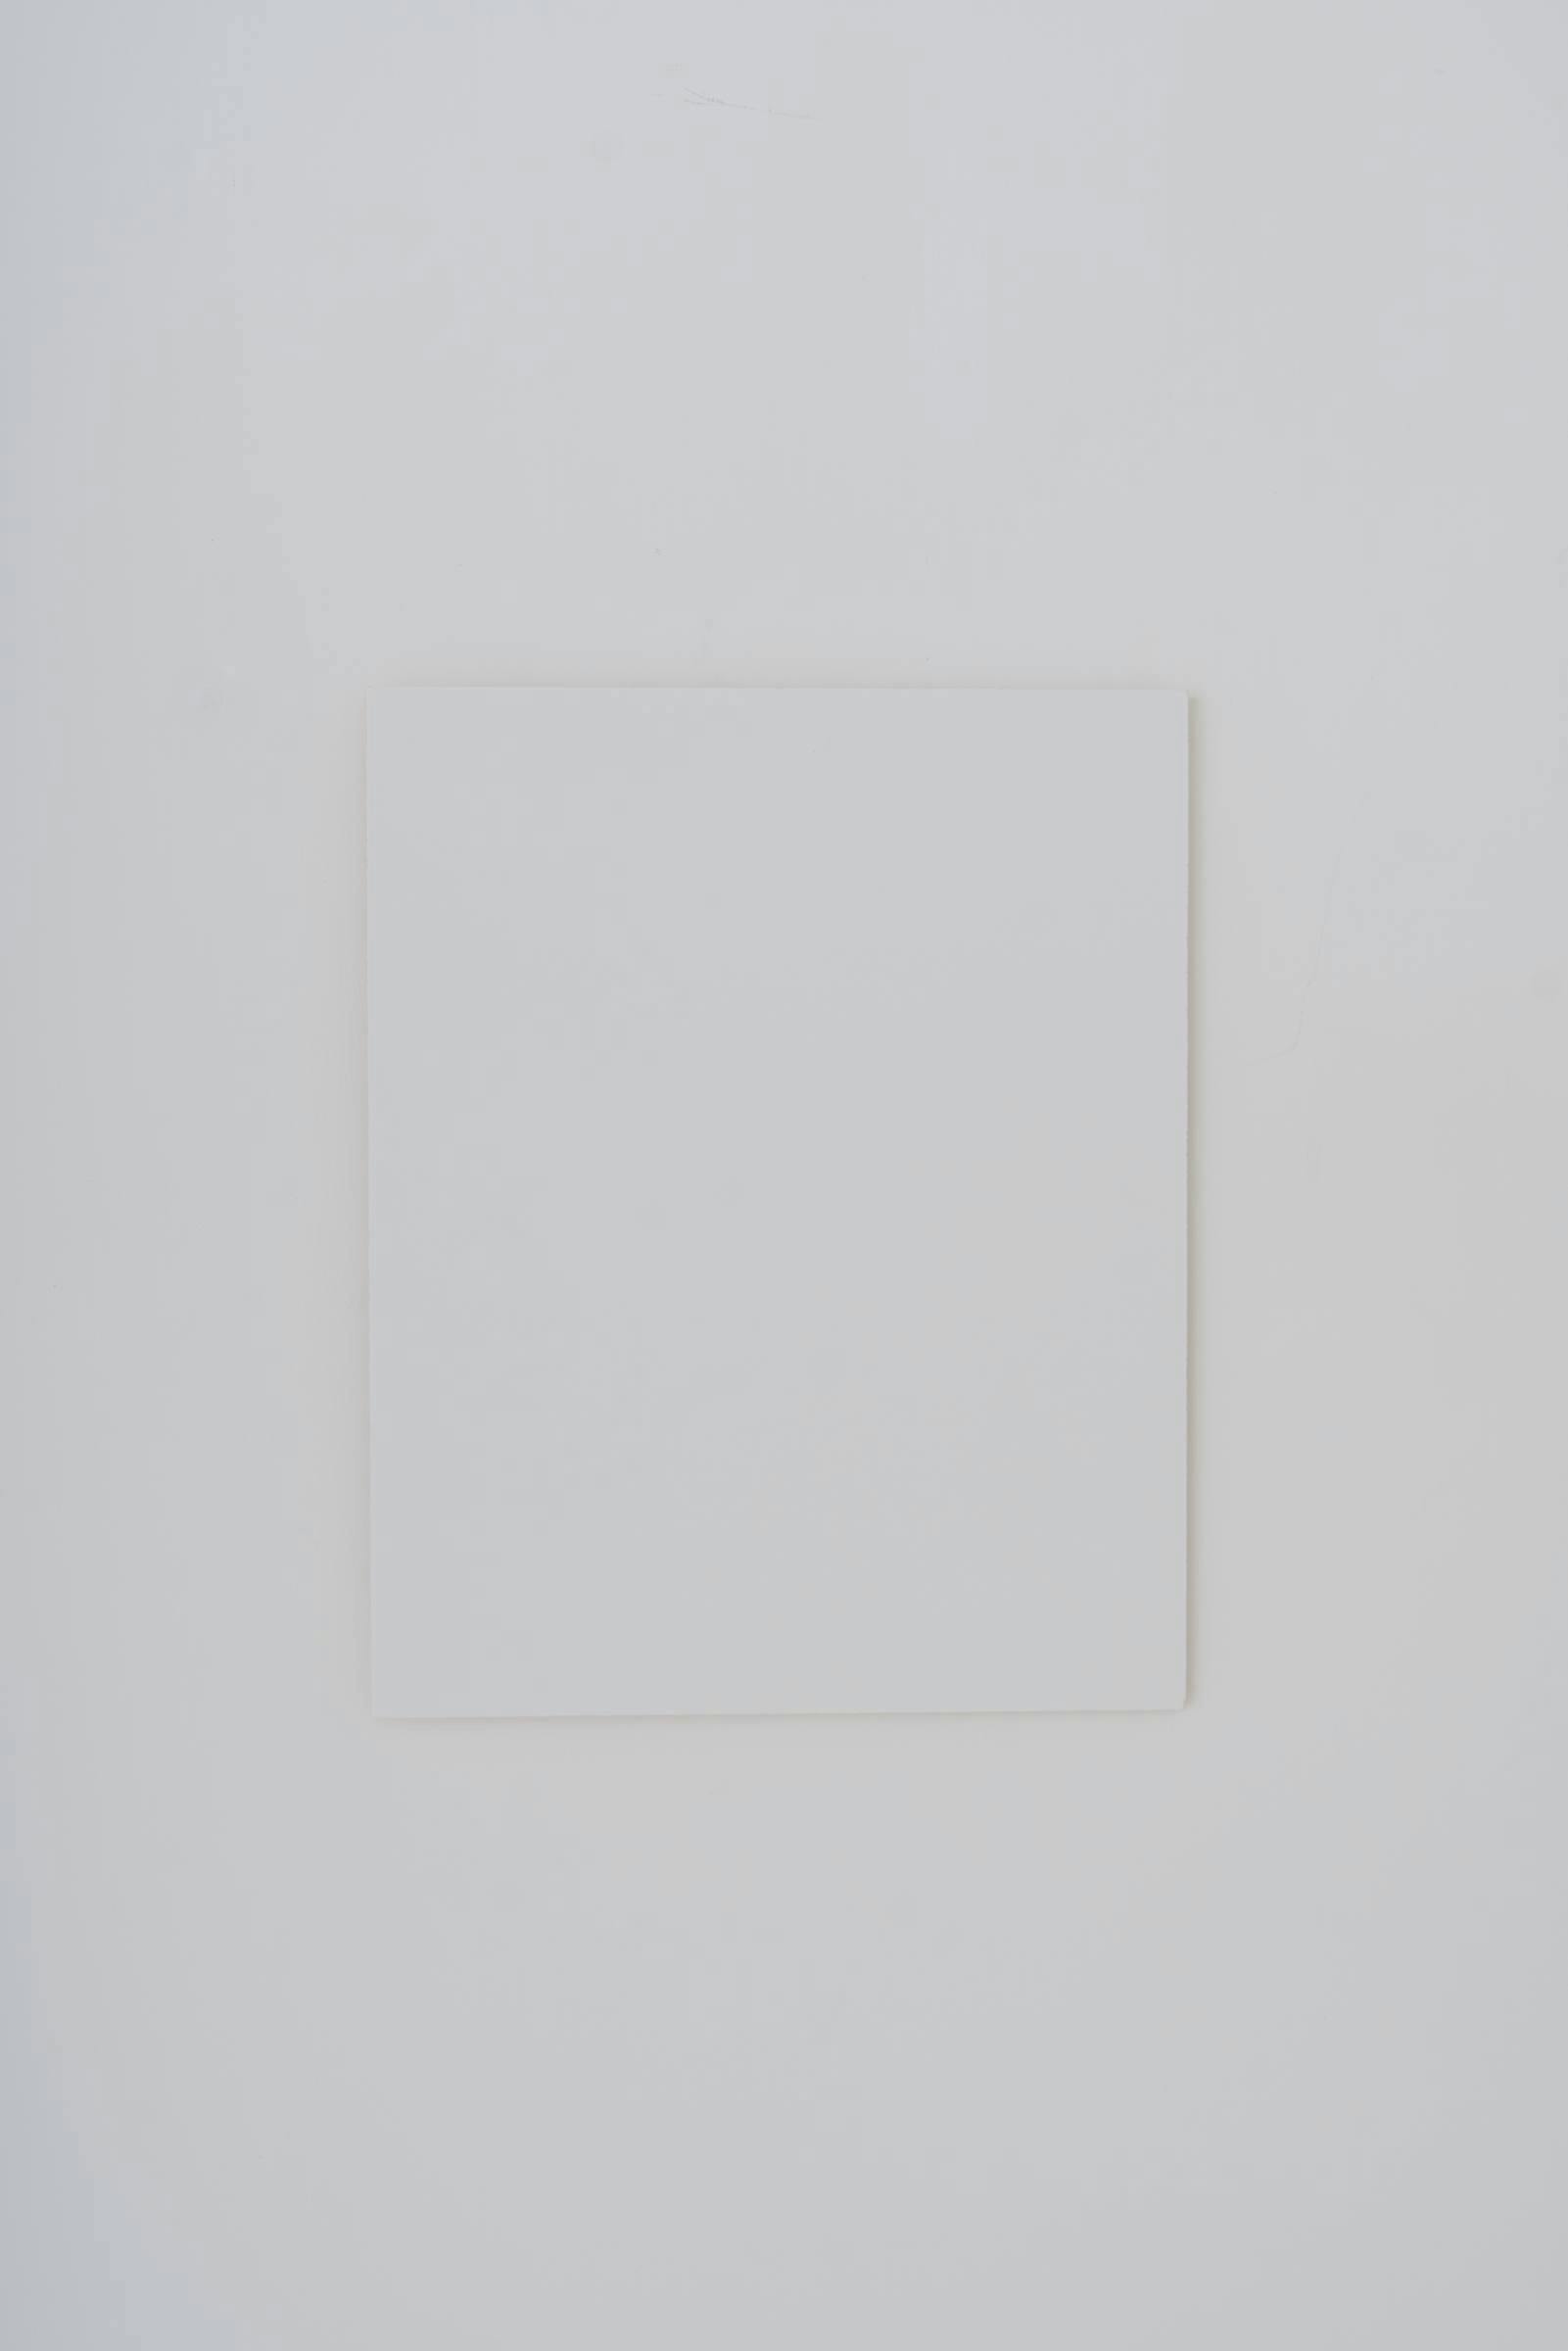 Image of a white canvas hung on a white wall.